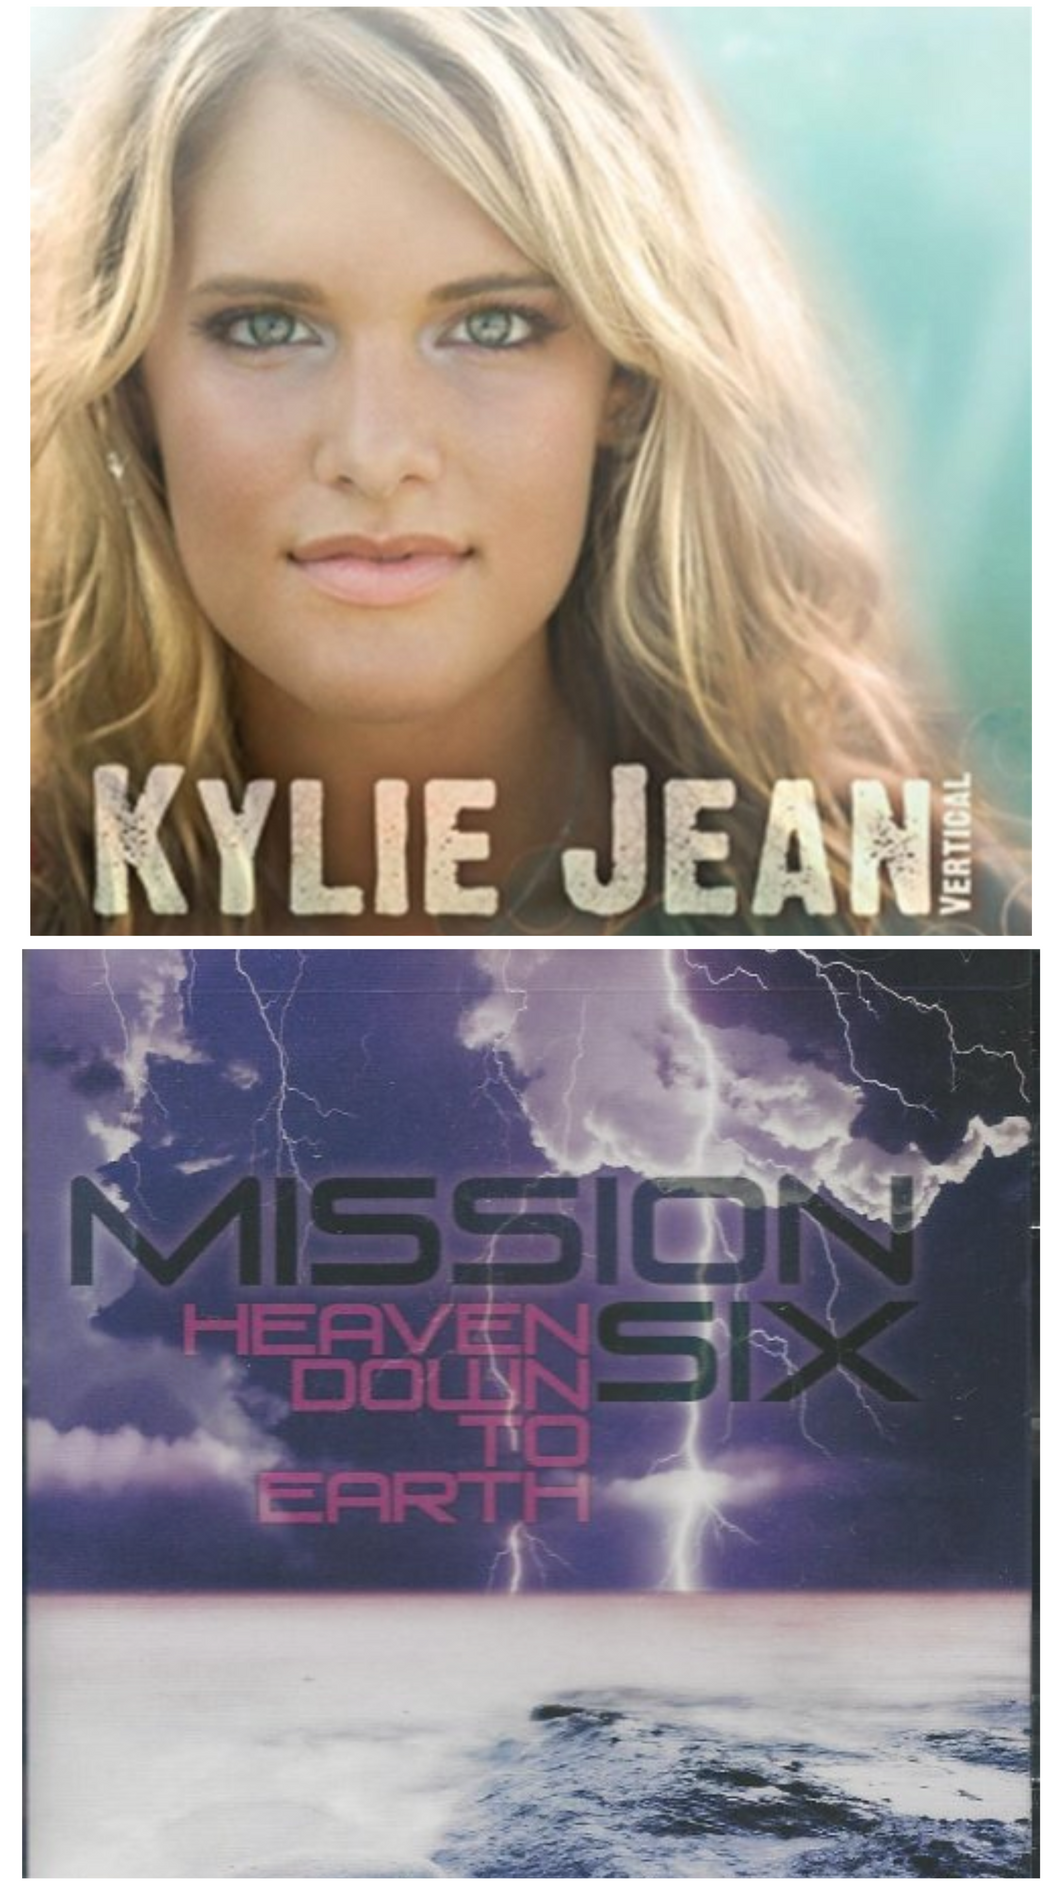 Kylie Jean Vertical + Mission Six Heaven Down to Earth 2CD